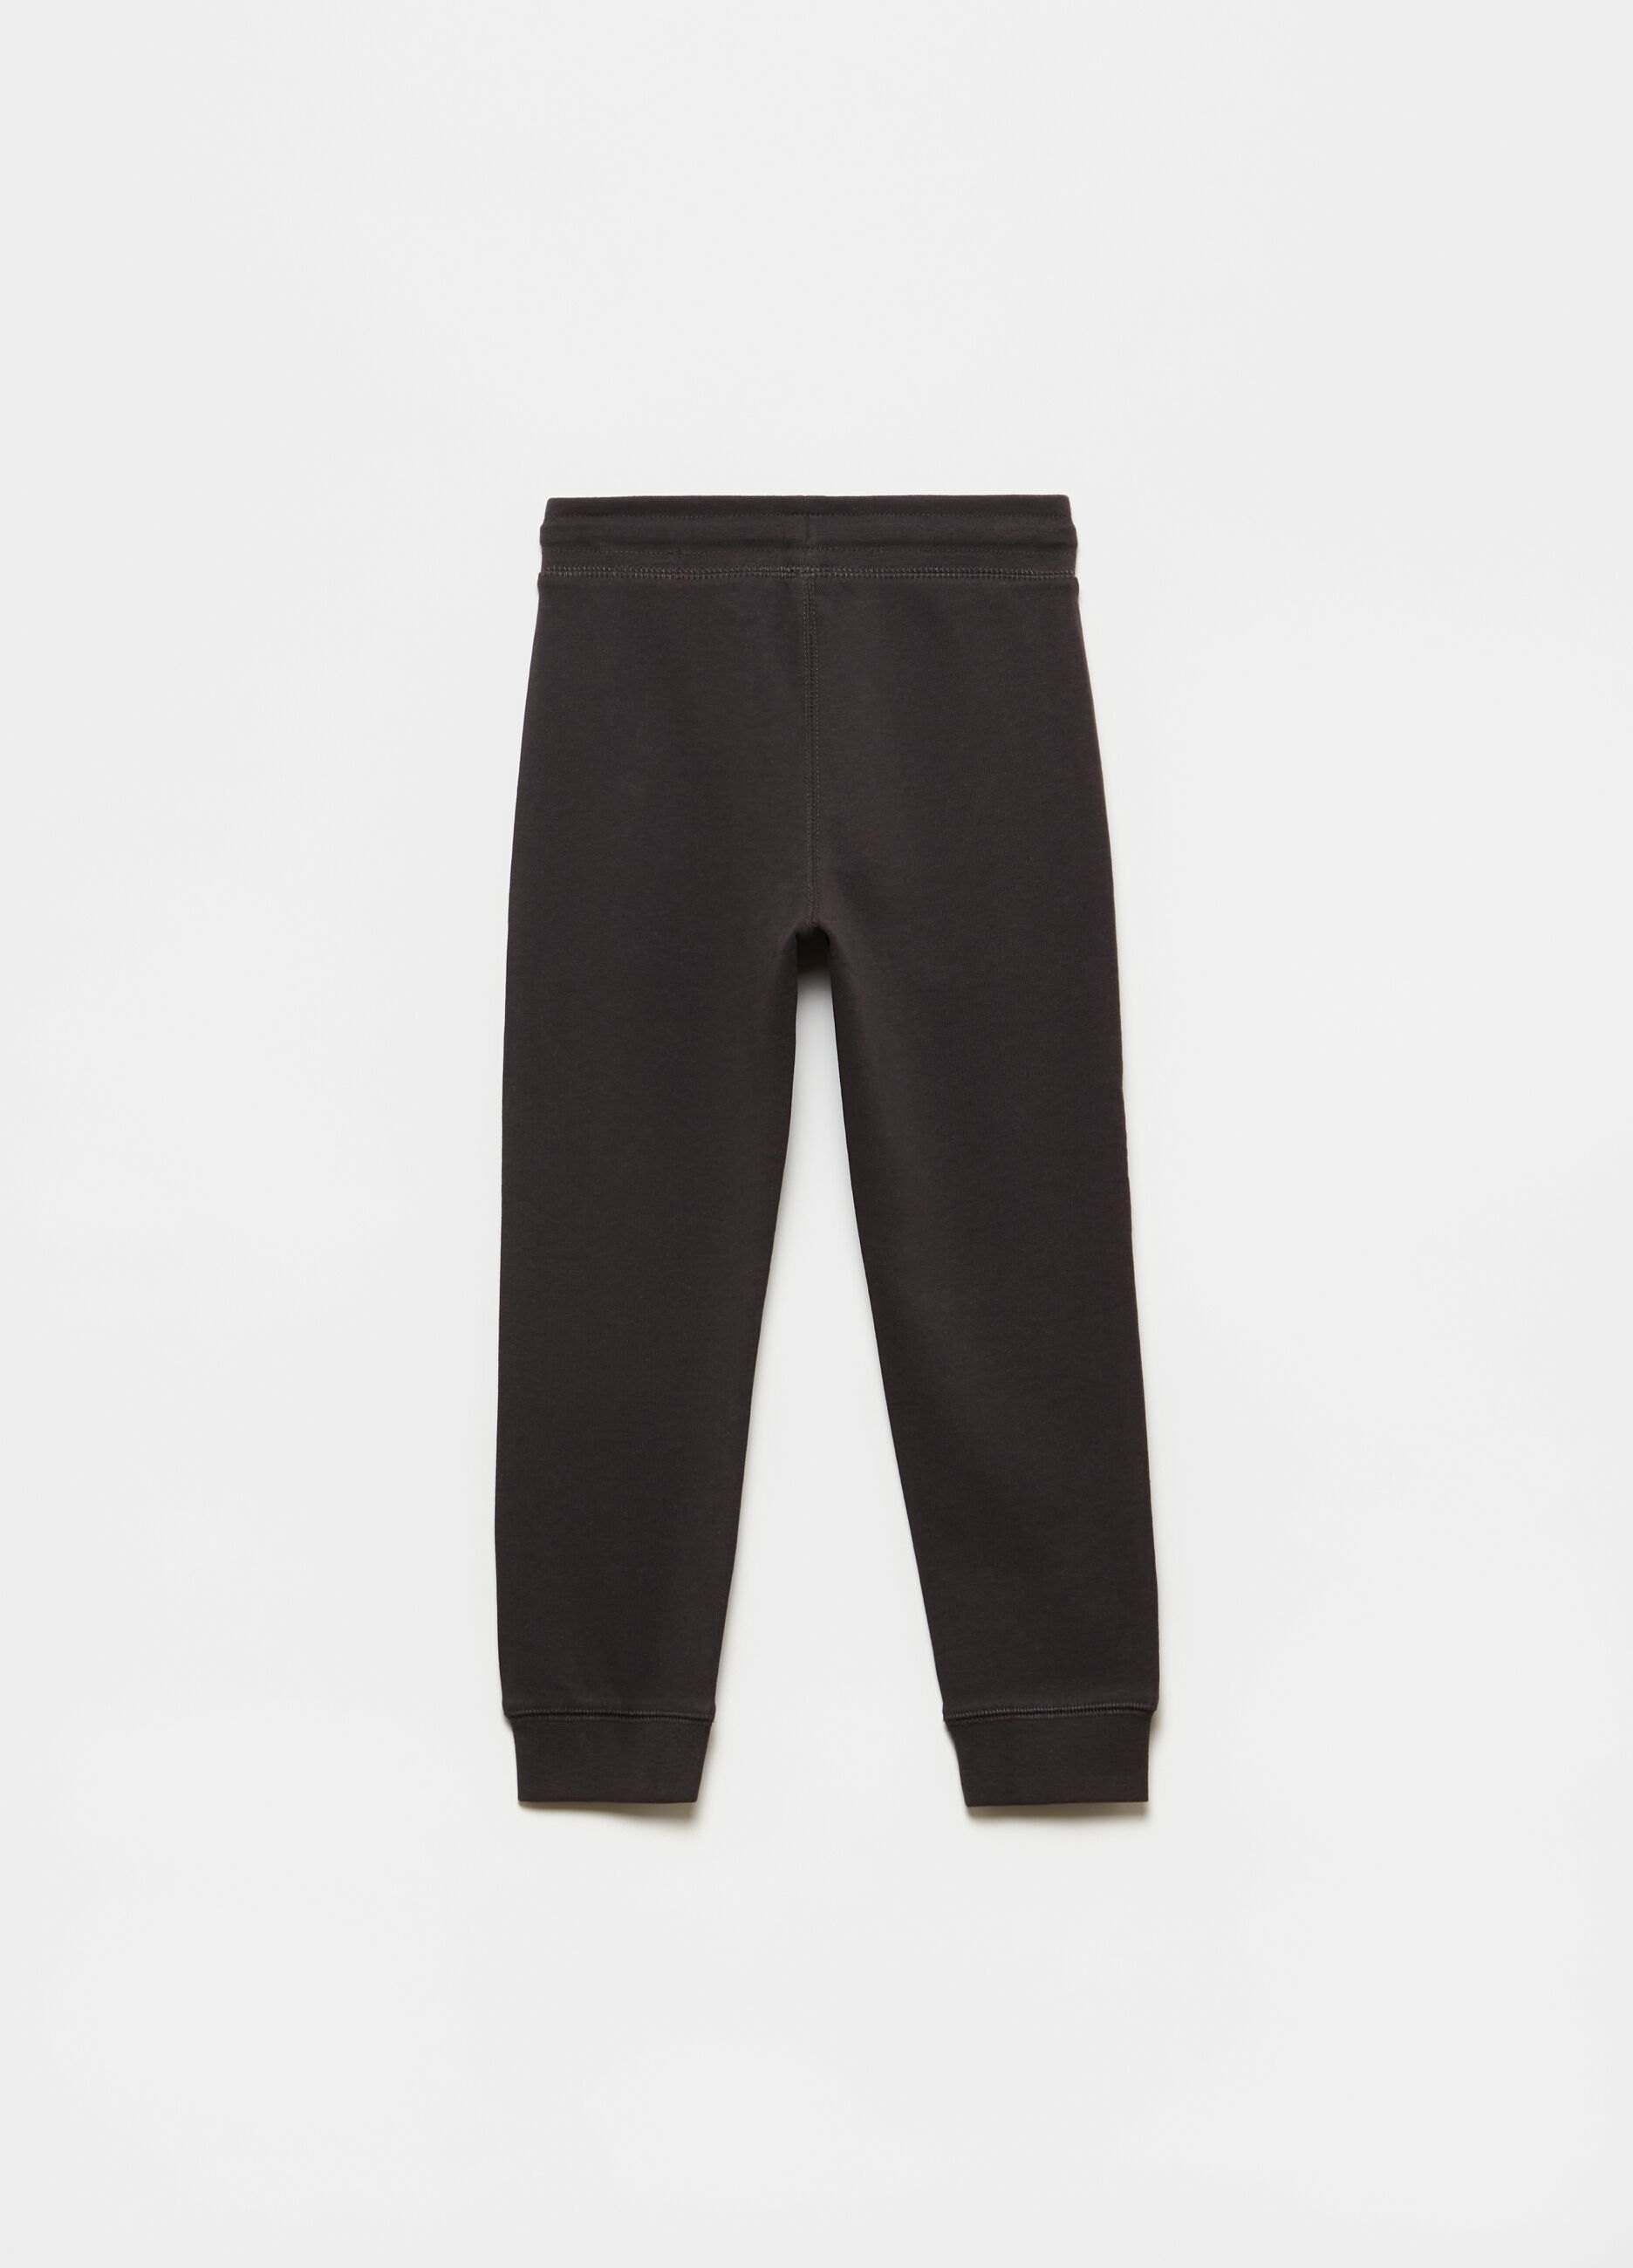 100% cotton French terry joggers